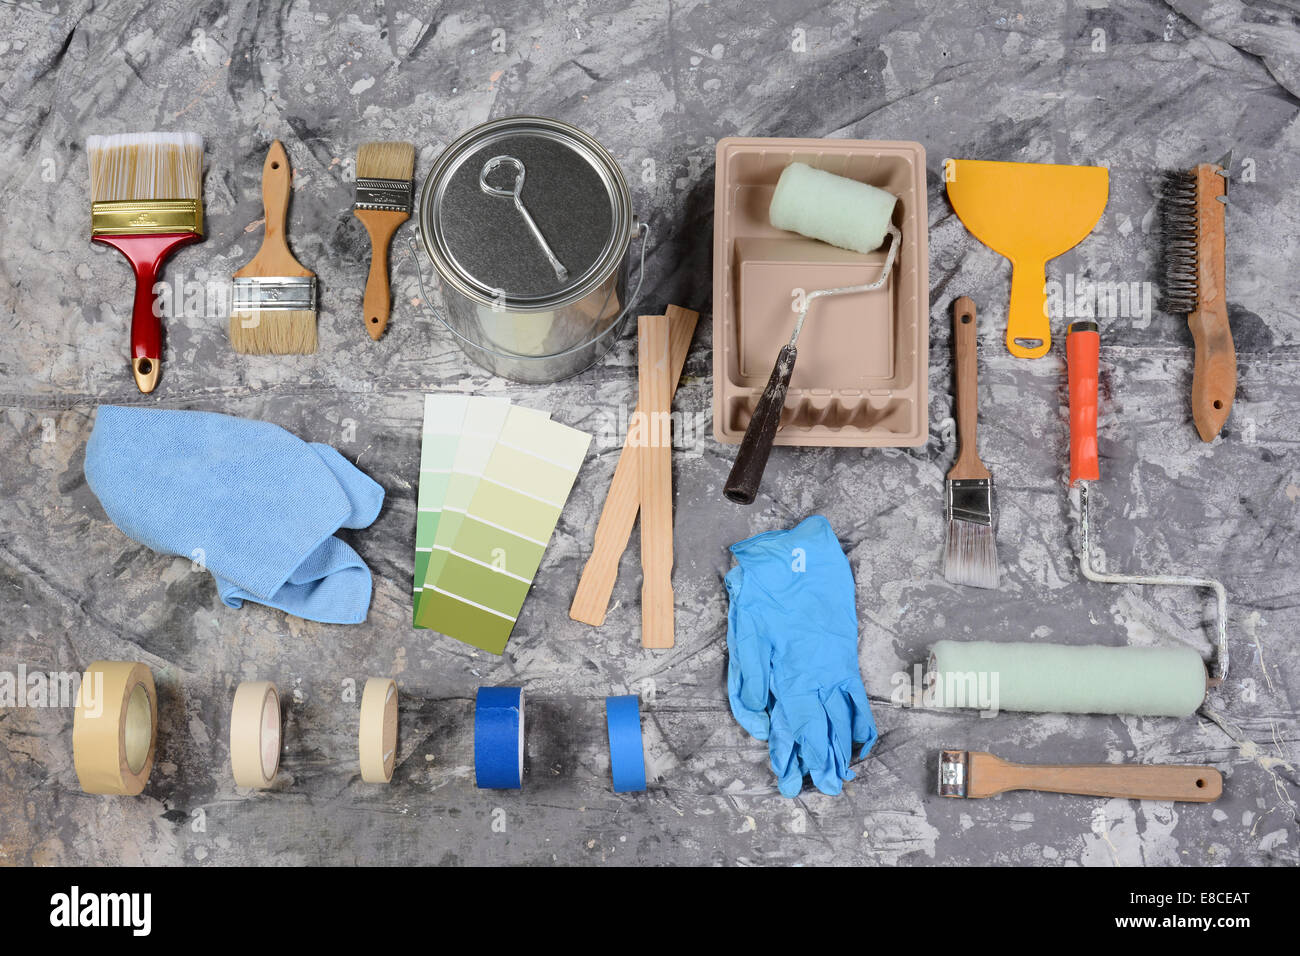 High angle shot of the tools needed to paint spread out on a drop cloth. Items include, paint can, brushes, rollers, tray, tape, Stock Photo